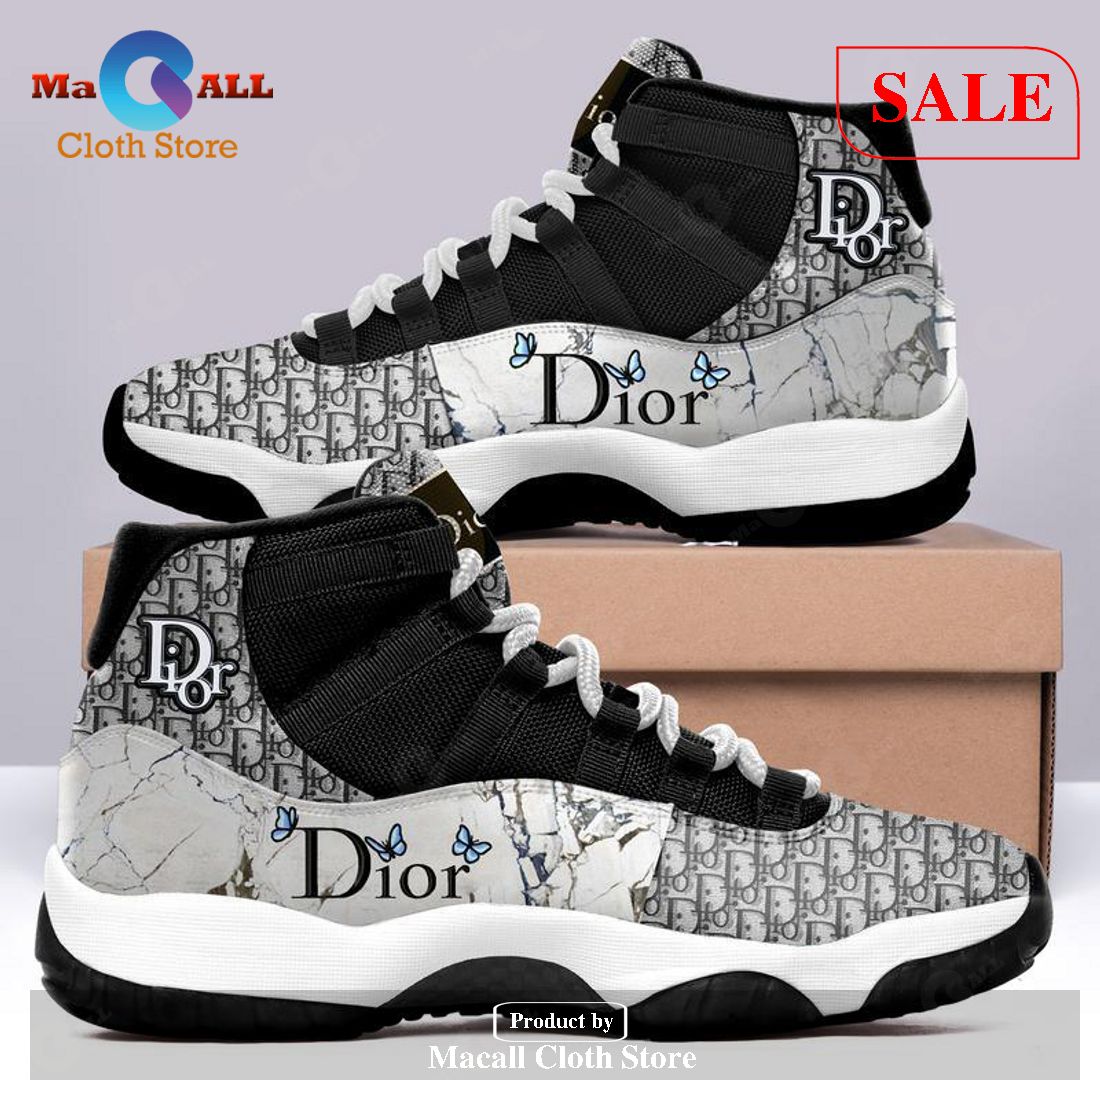 SALE] Dior Luxury Air Jordan 11 Shoes Sport 2023 Dior Sneakers Gifts For Men Women POD Design Macall Cloth Store - Destination for fashionistas